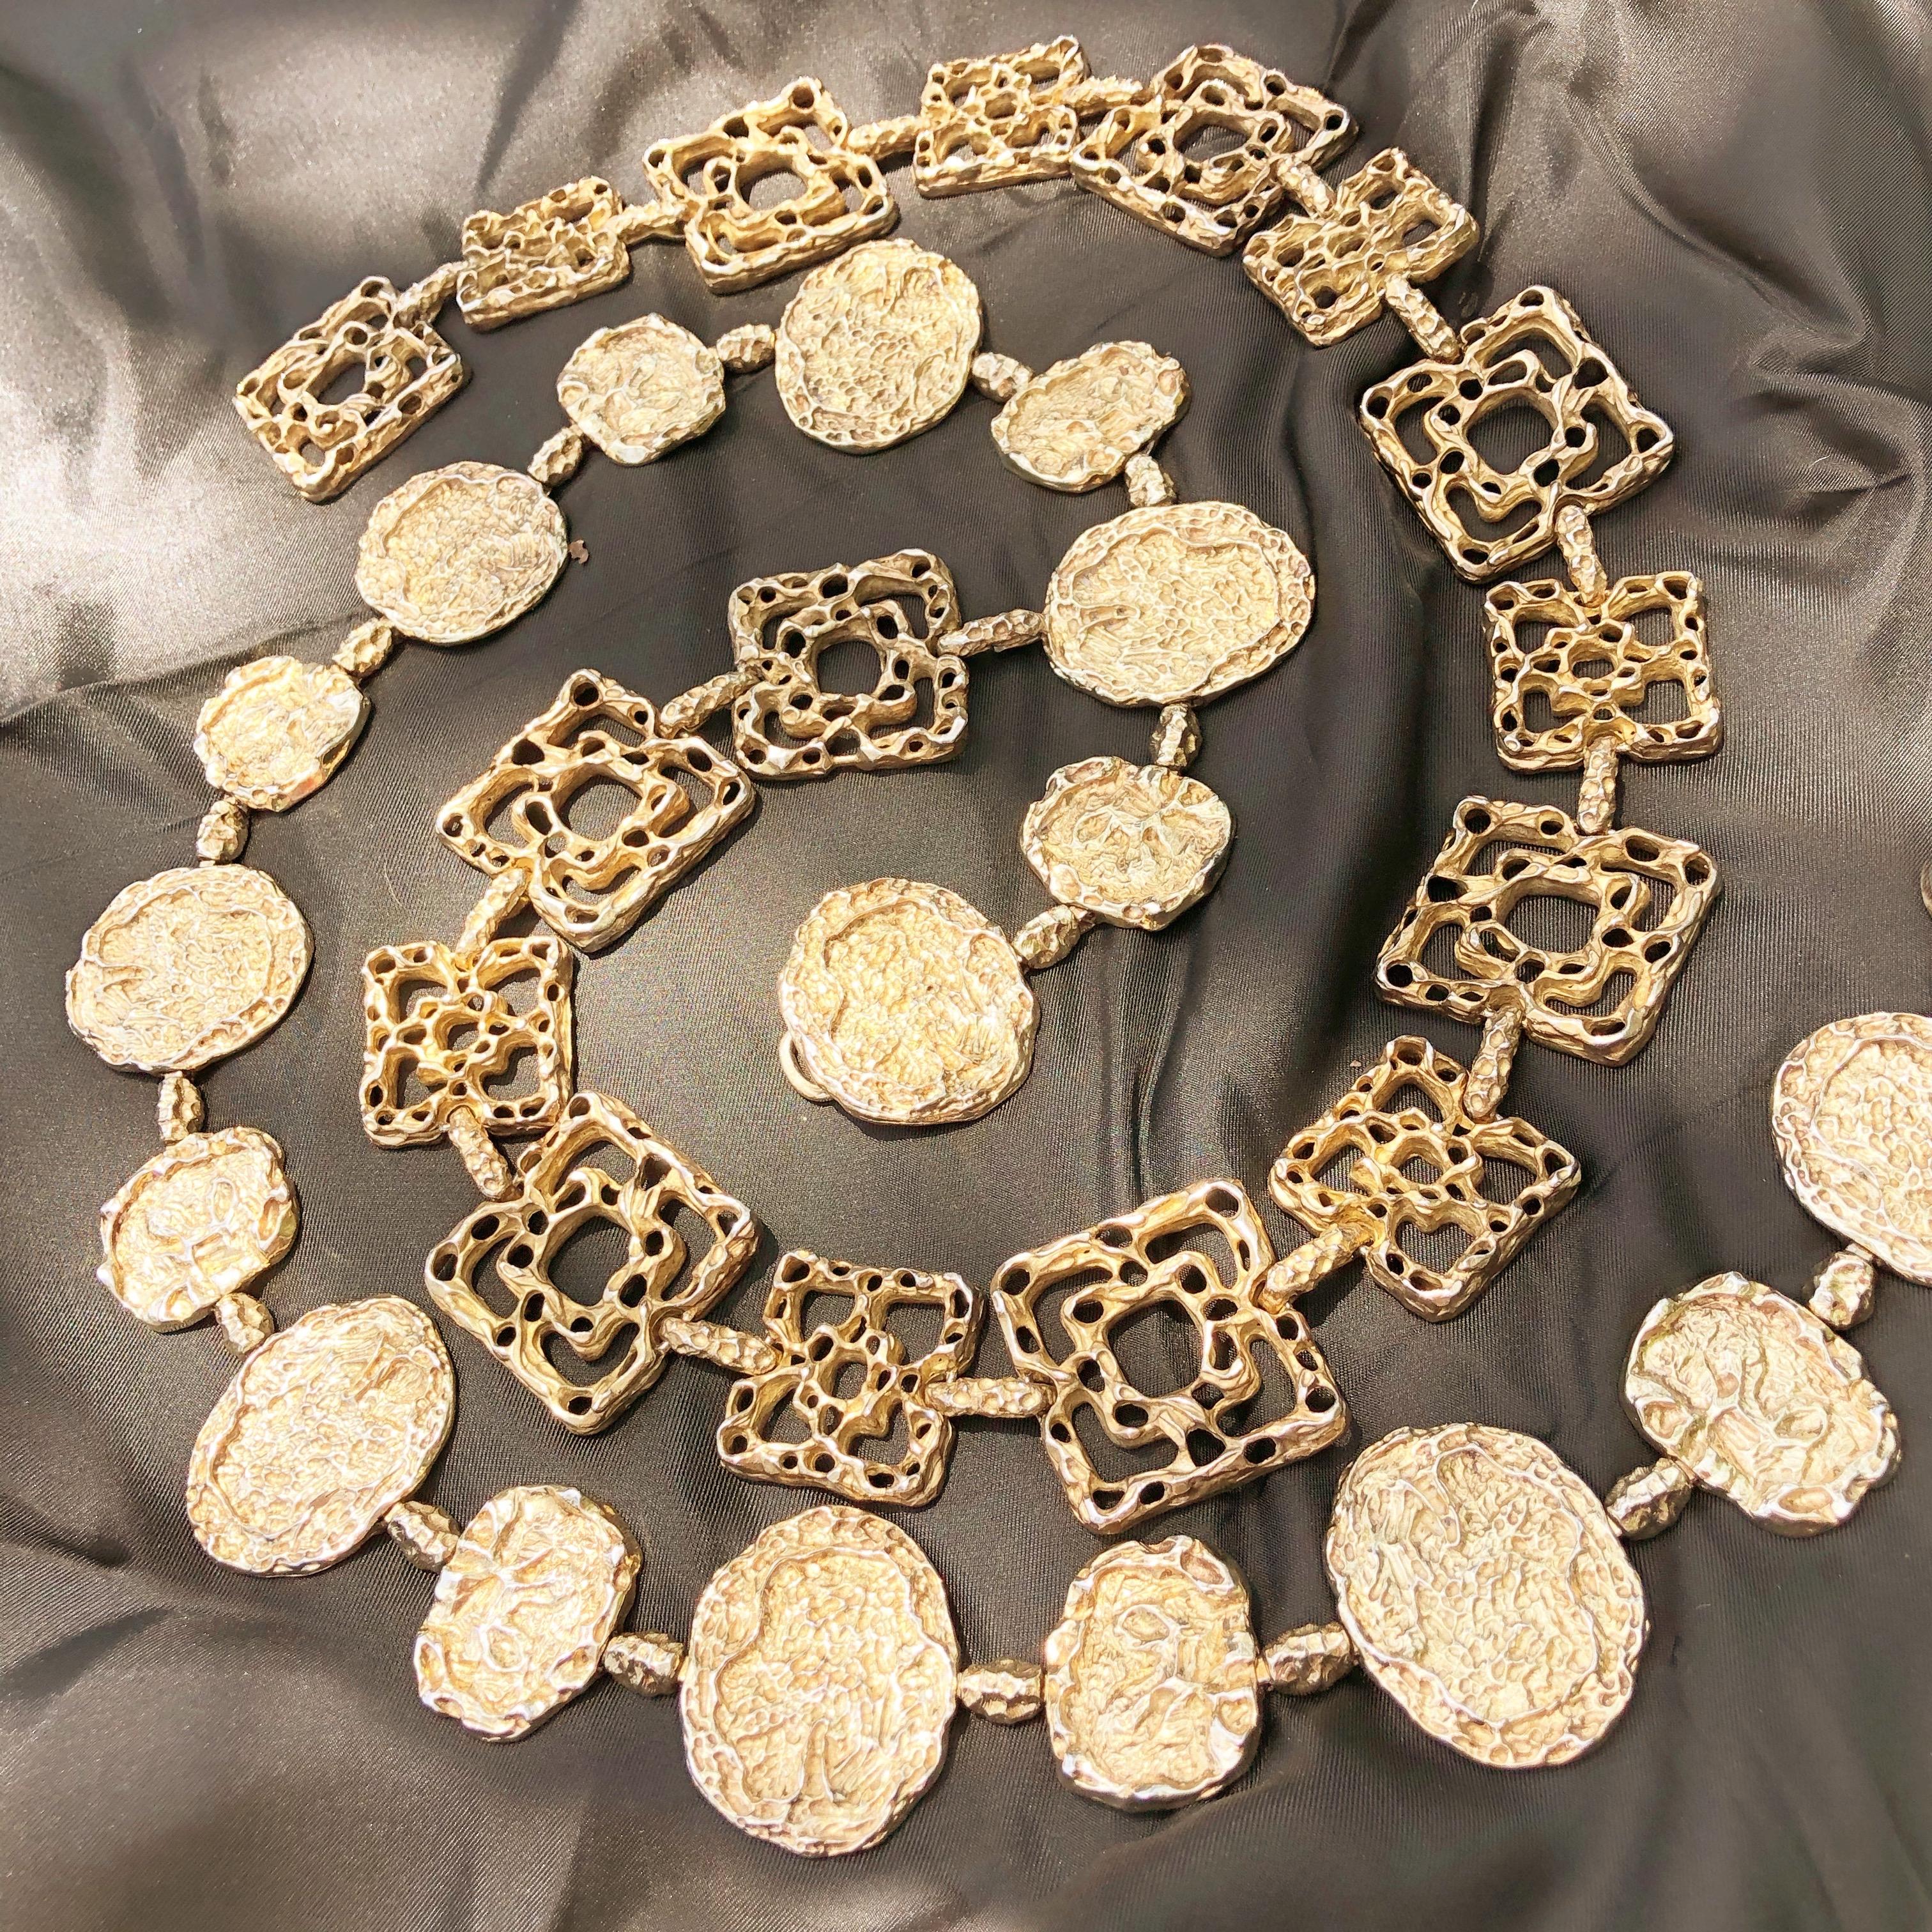 An extremely rare gold vermeil belt by Cartier, circa 1970, also can be worn as a chunky statement necklace.  This highly sought after and coveted belt is made from solid sterling silver covered in gold, is marked 